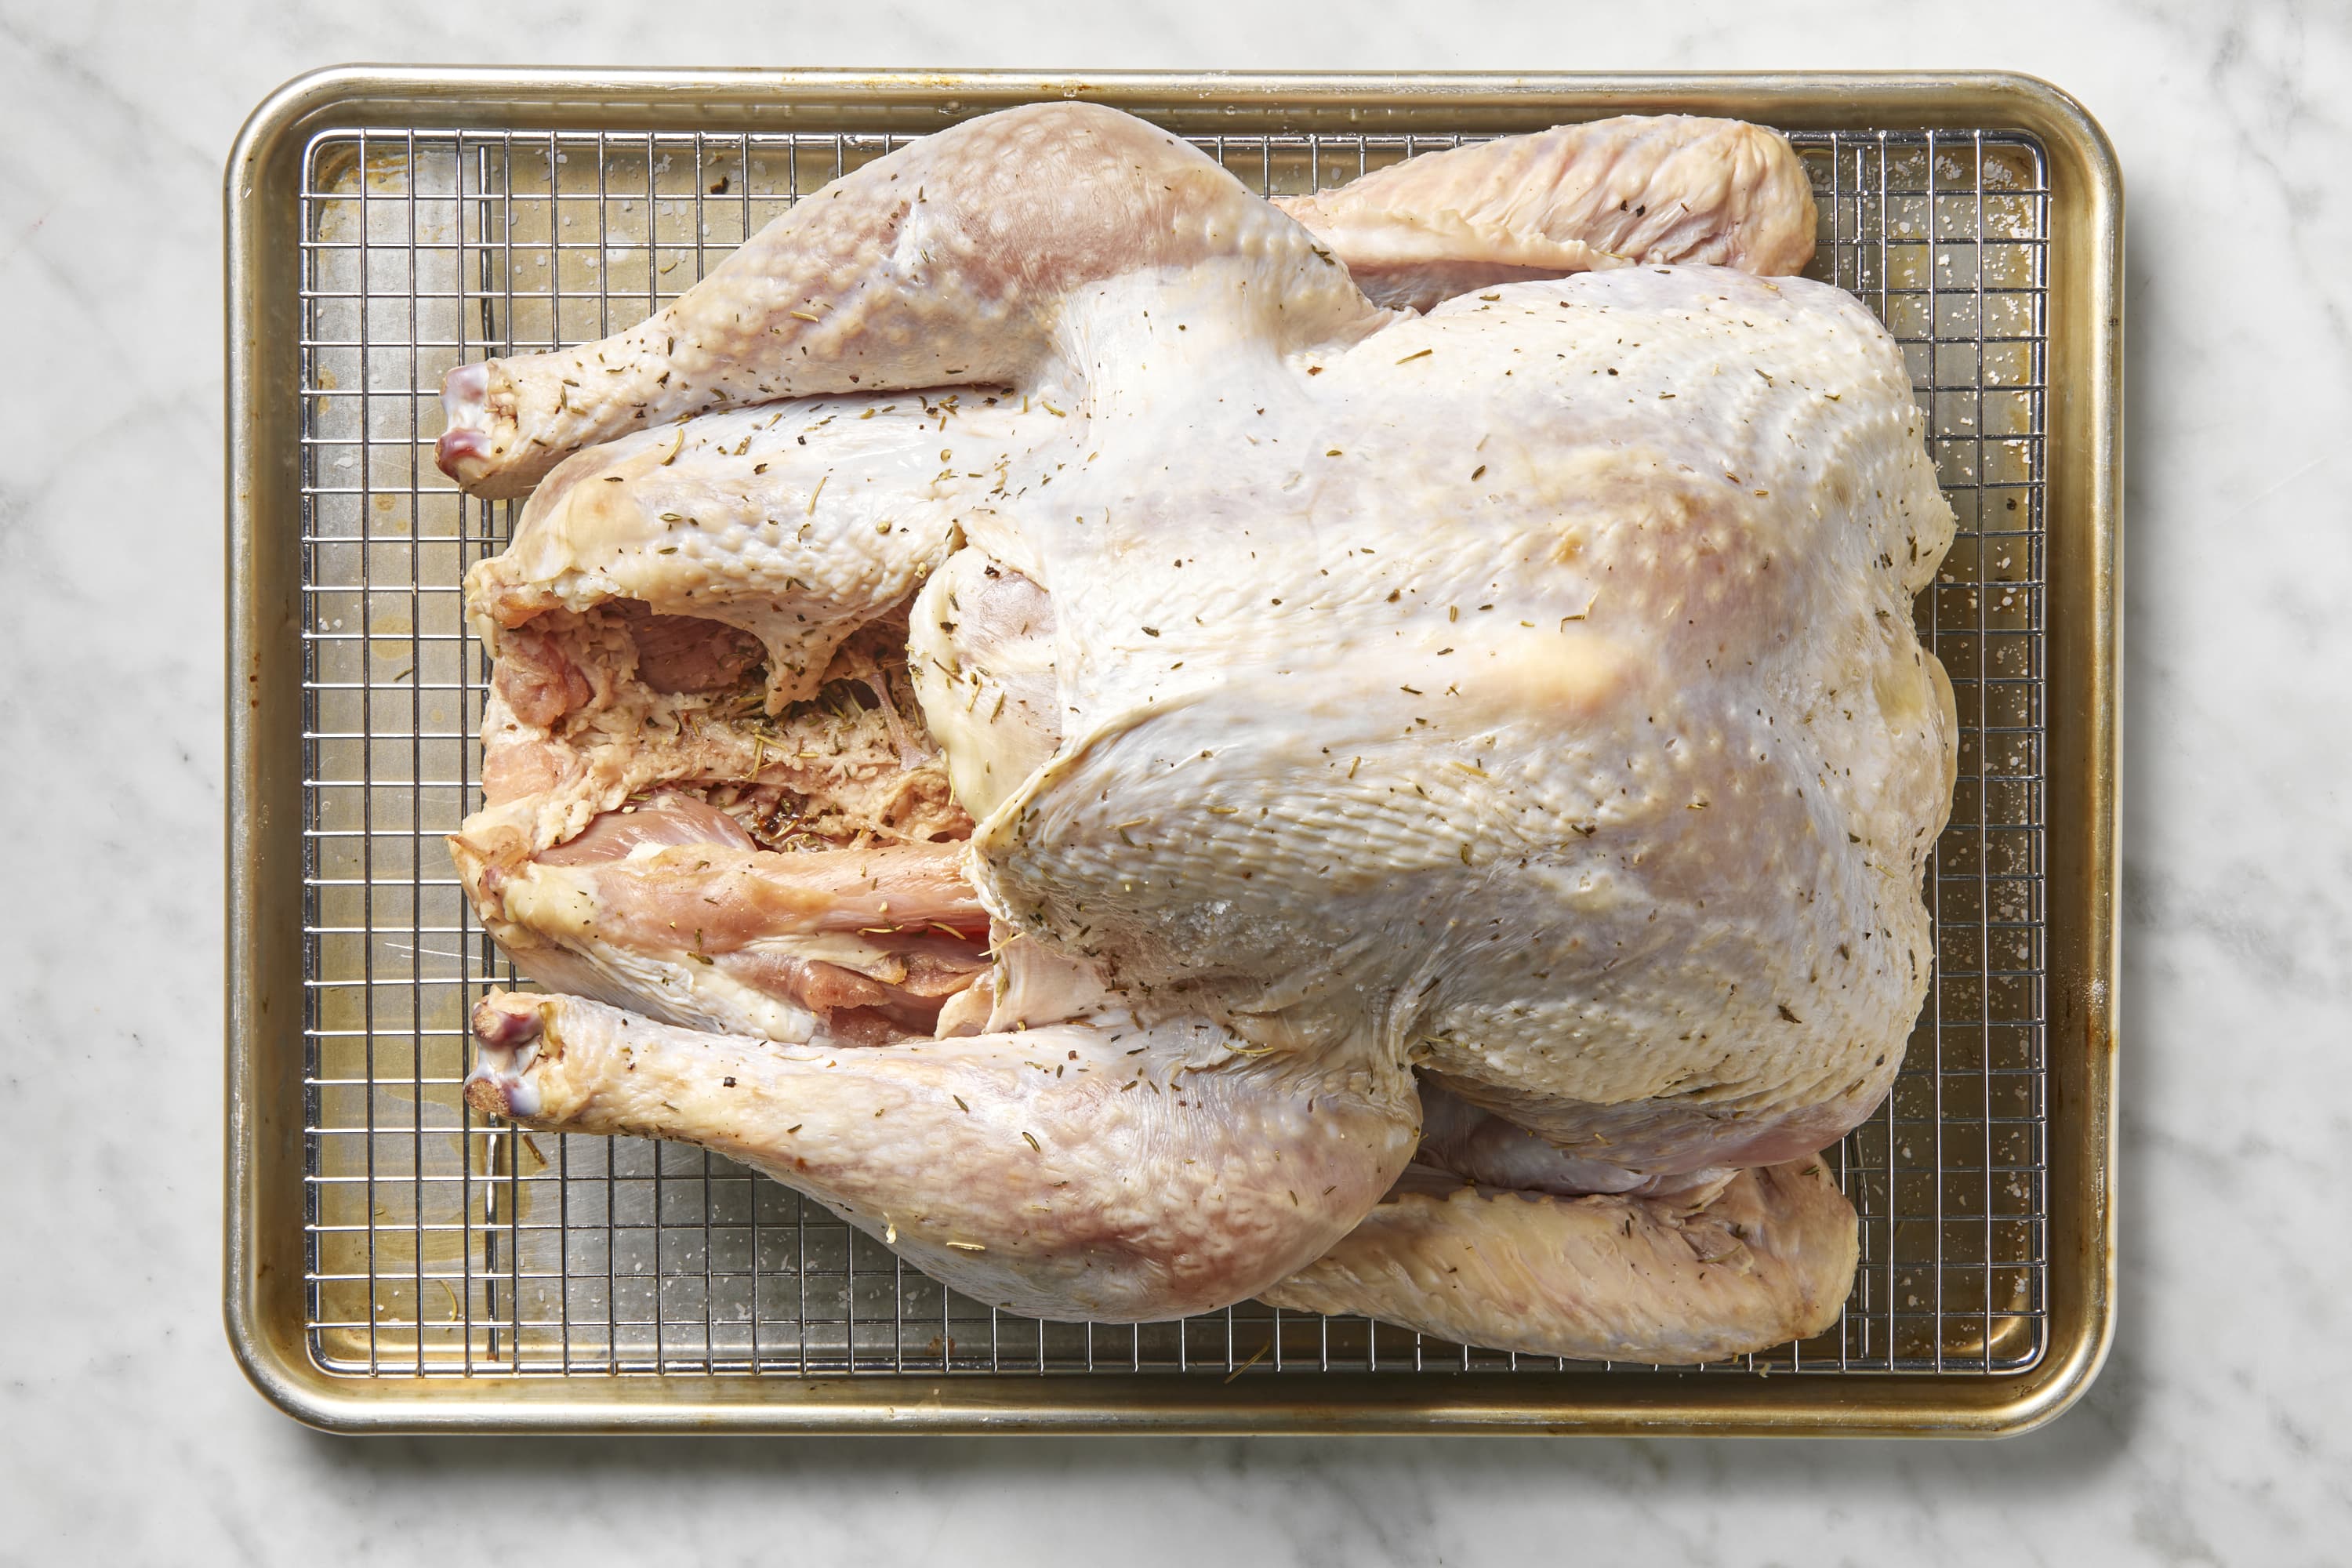 https://cdn.apartmenttherapy.info/image/upload/v1695677008/k/Photo/Recipes/2023-09-how-to-dry-brine-a-turkey/how-to-dry-brine-a-turkey-571.jpg